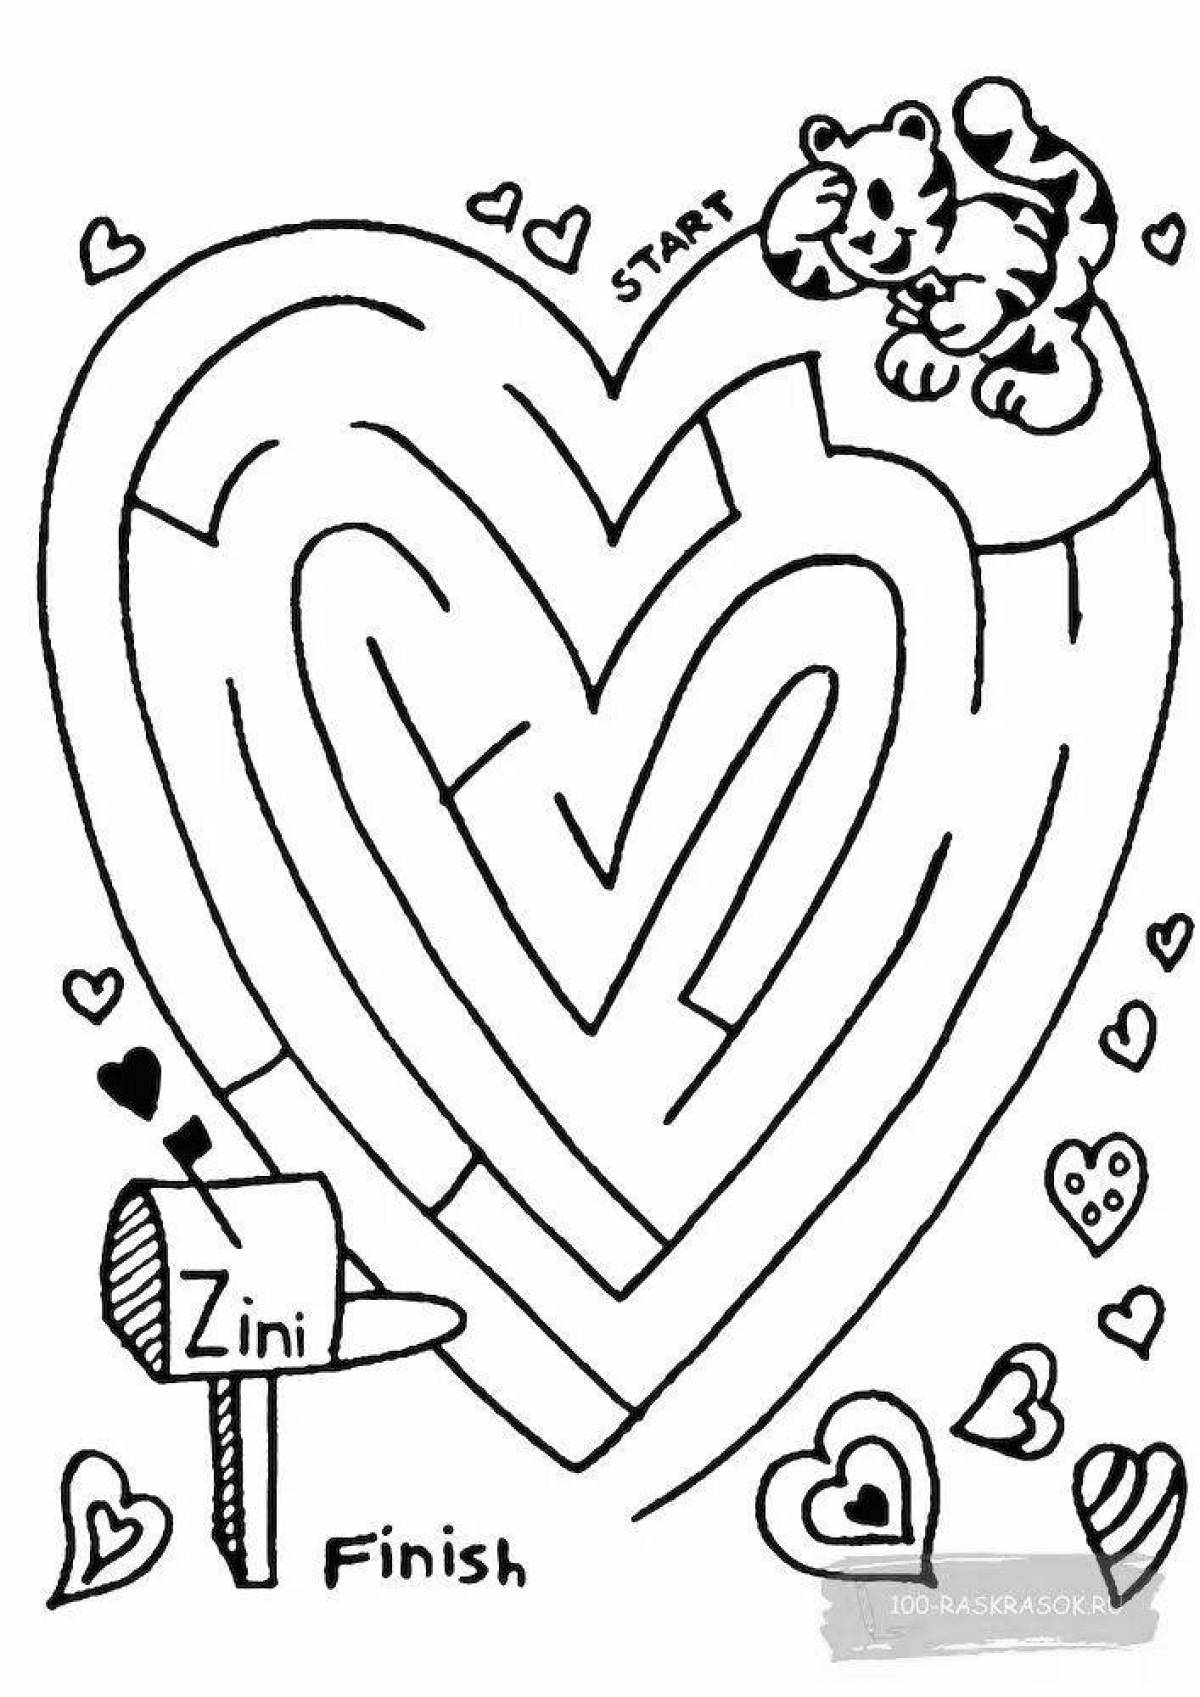 Witty maze coloring book for kids 7-8 years old